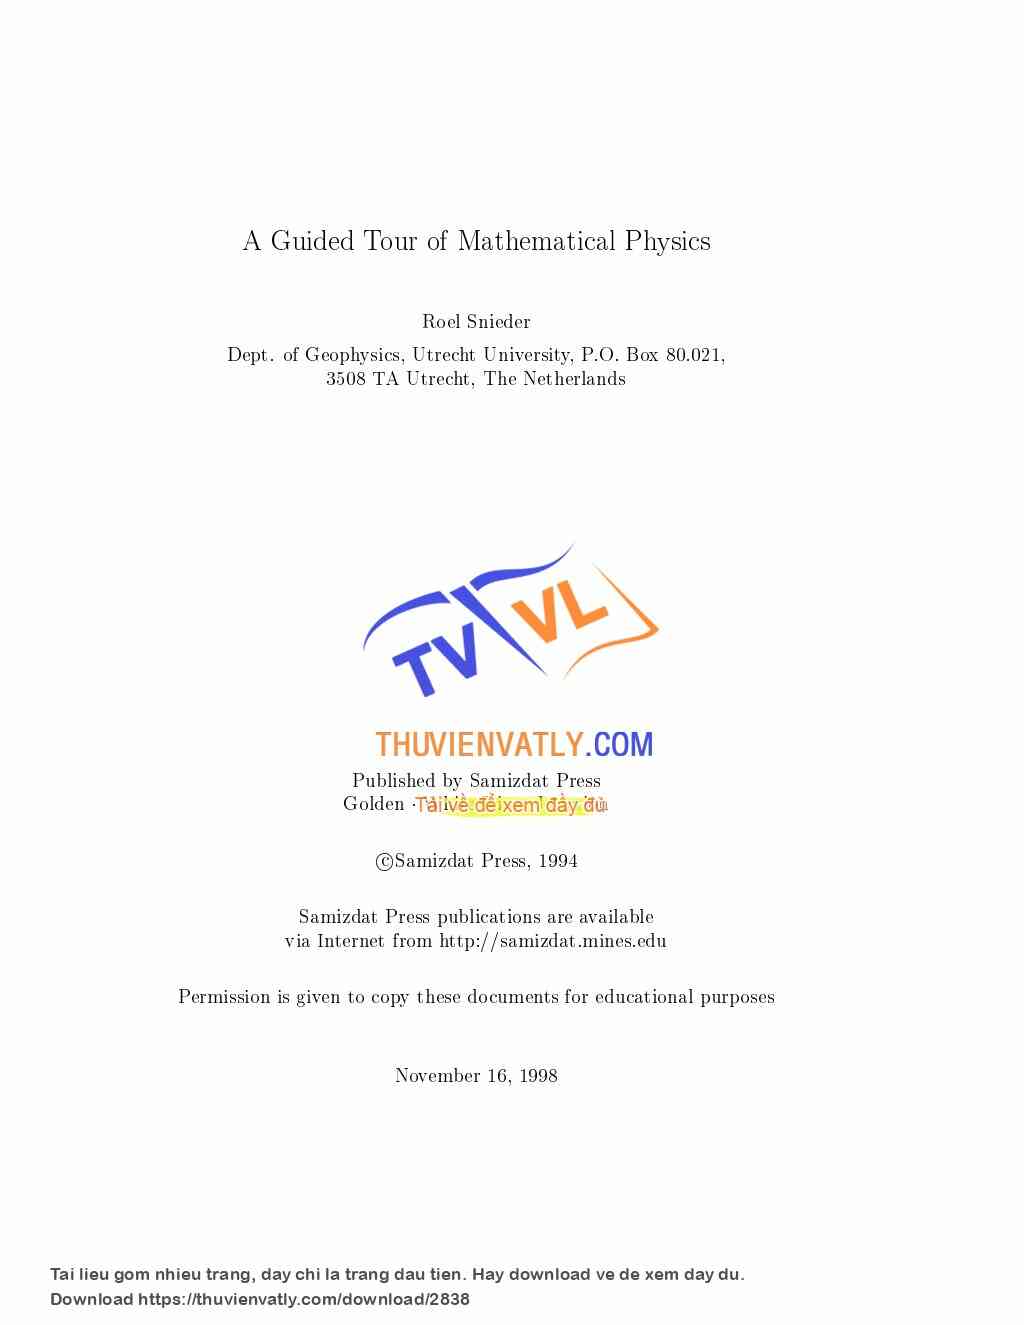 A Guided Tour of Mathematical Physics (Roel Snieder)